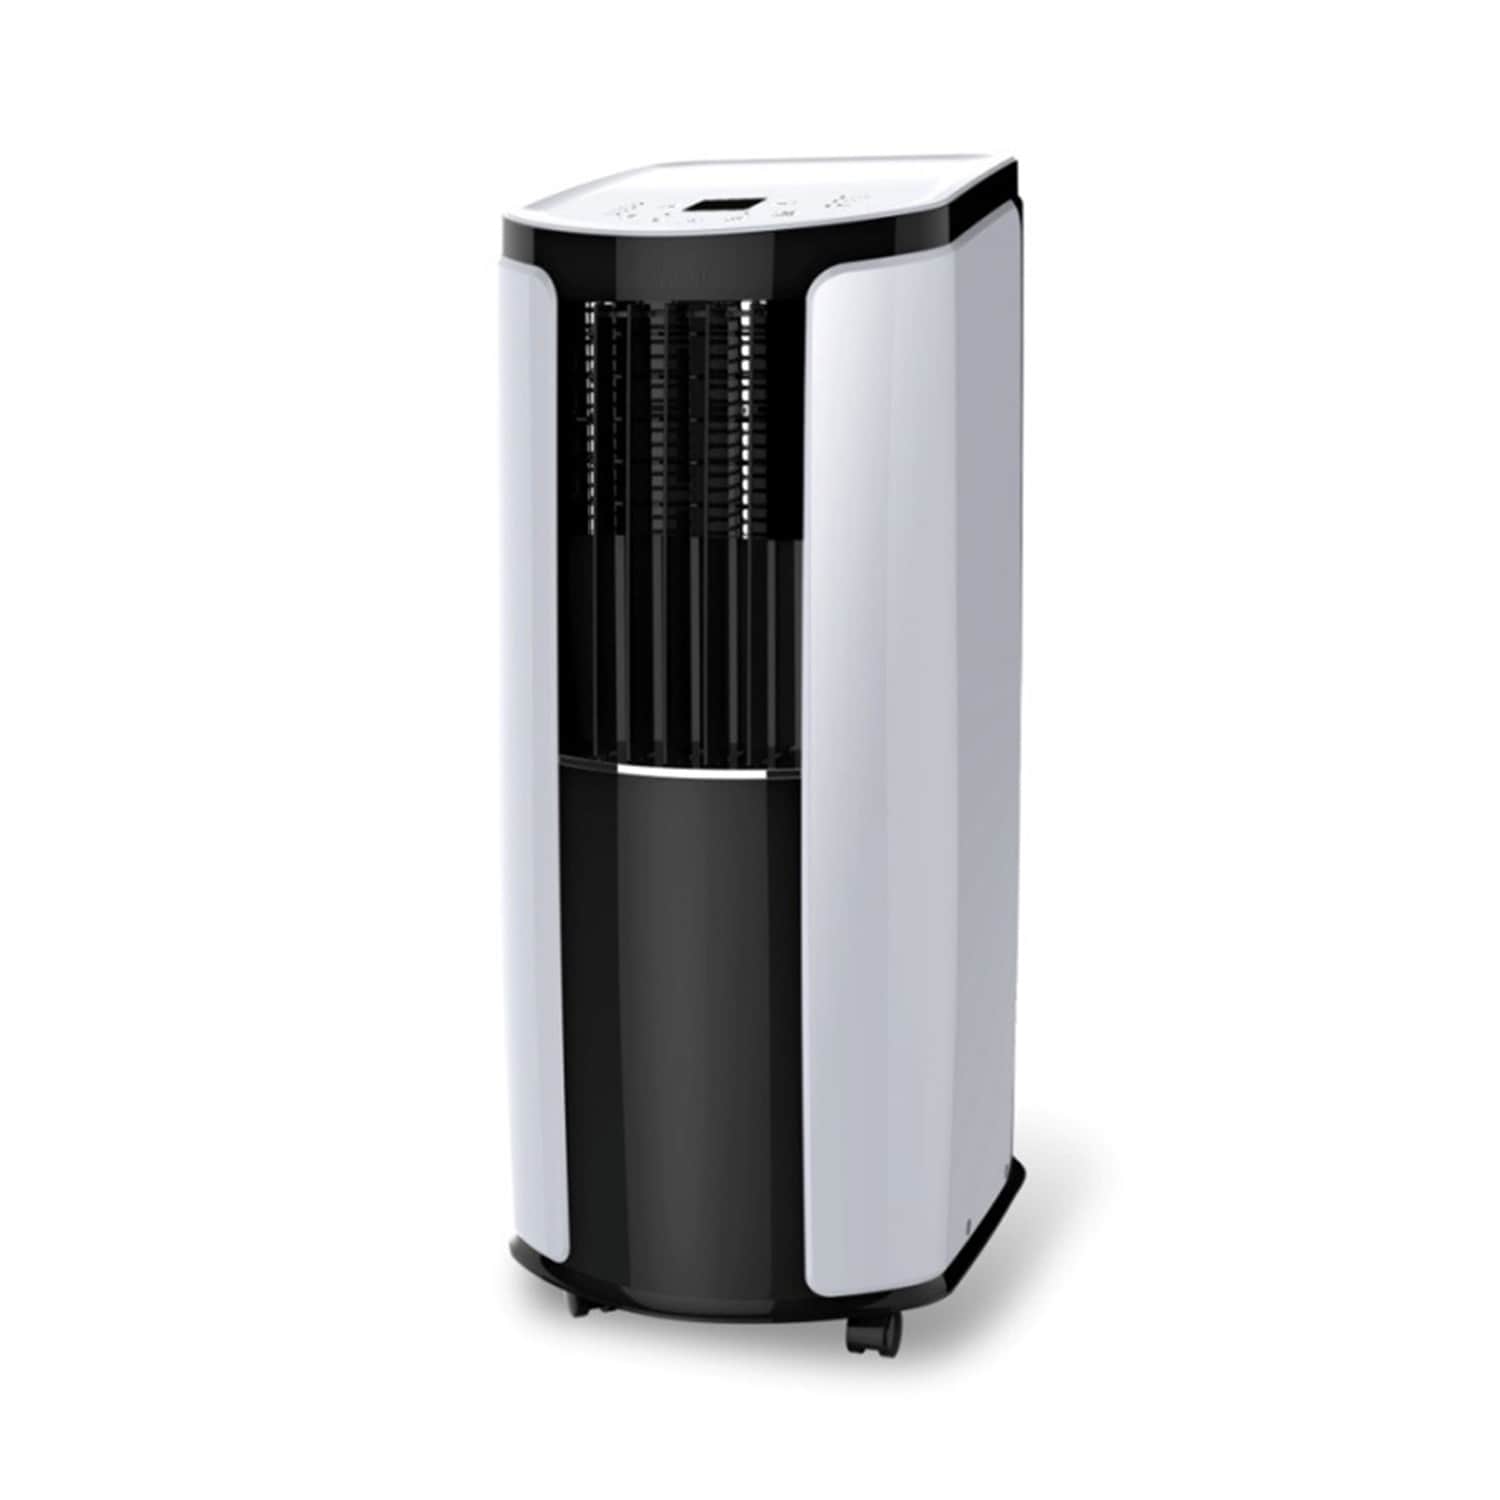 https://ak1.ostkcdn.com/images/products/is/images/direct/4ca620ad495638b6da87b2433d72a5c1b3aafb1c/Tosot-10000-BTU-Portable-Air-Conditioner.jpg